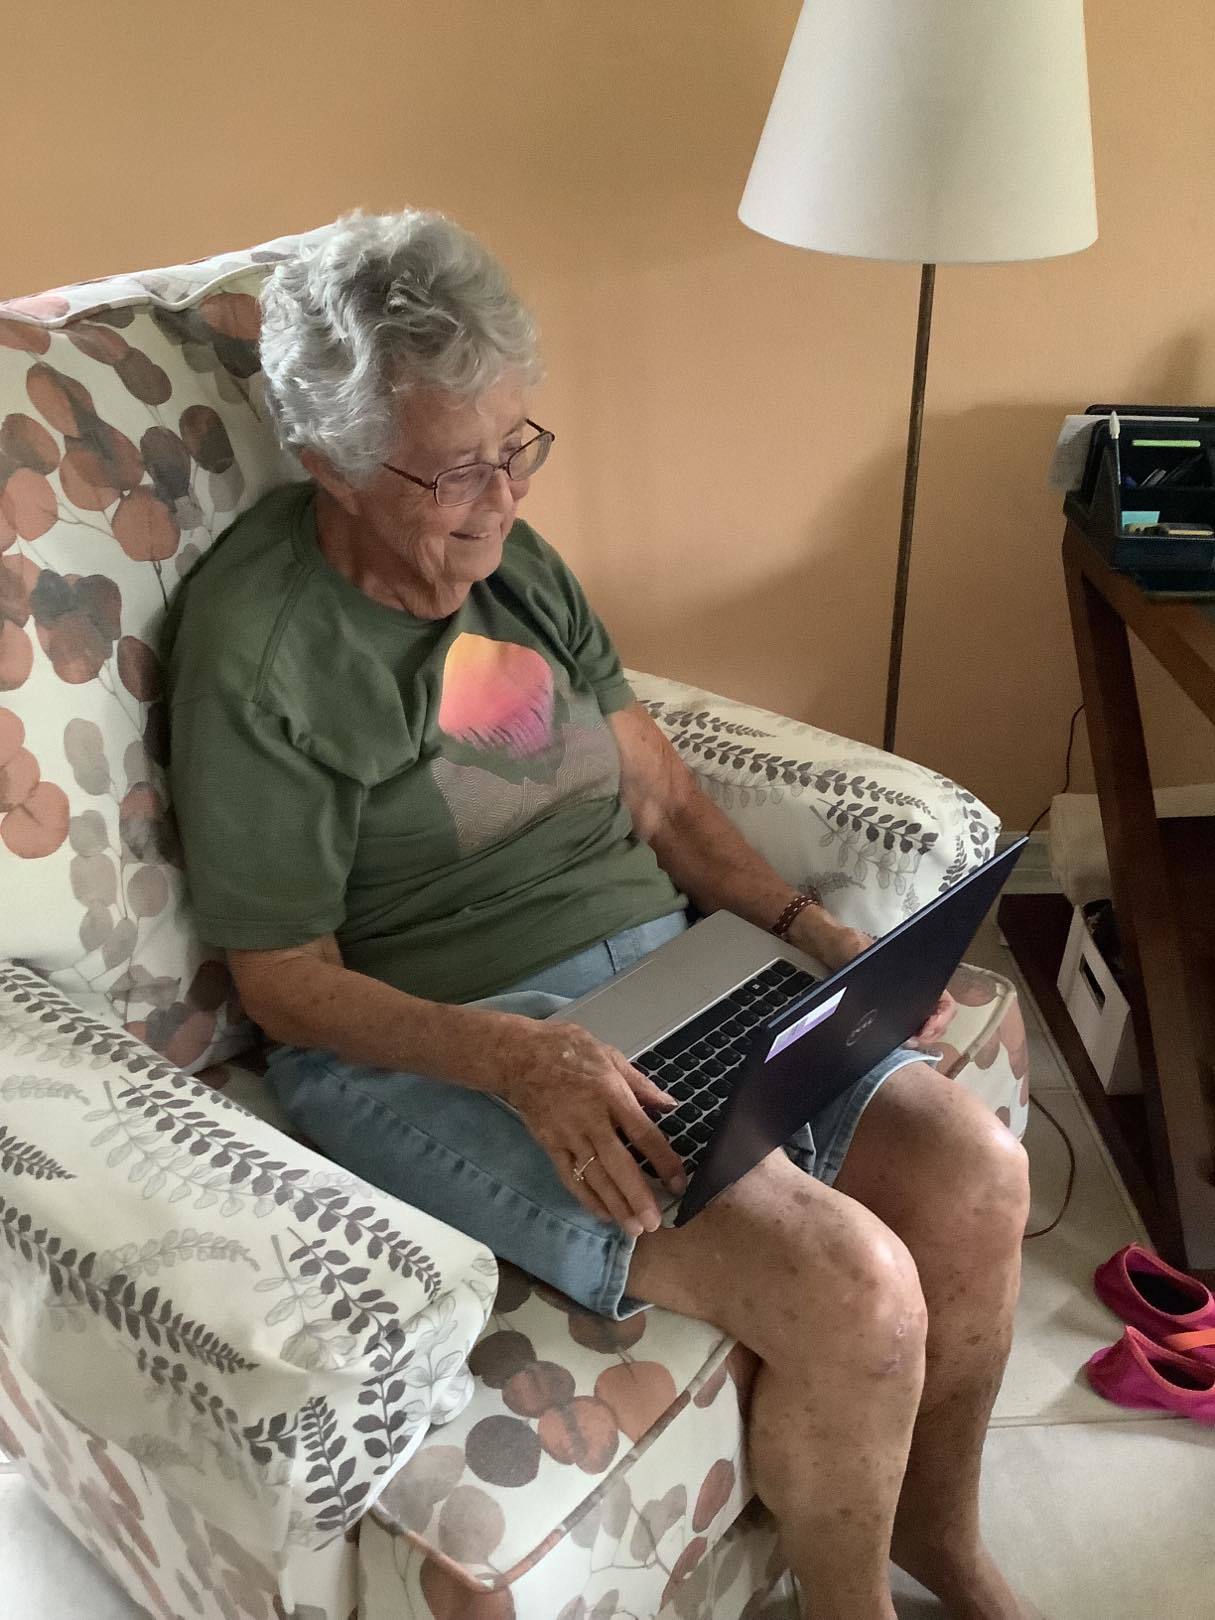 Judy Eaton, 83, said she felt grateful that her son suggested doing an acrostic puzzle every day to ward off the loneliness of the pandemic. Courtesy photo